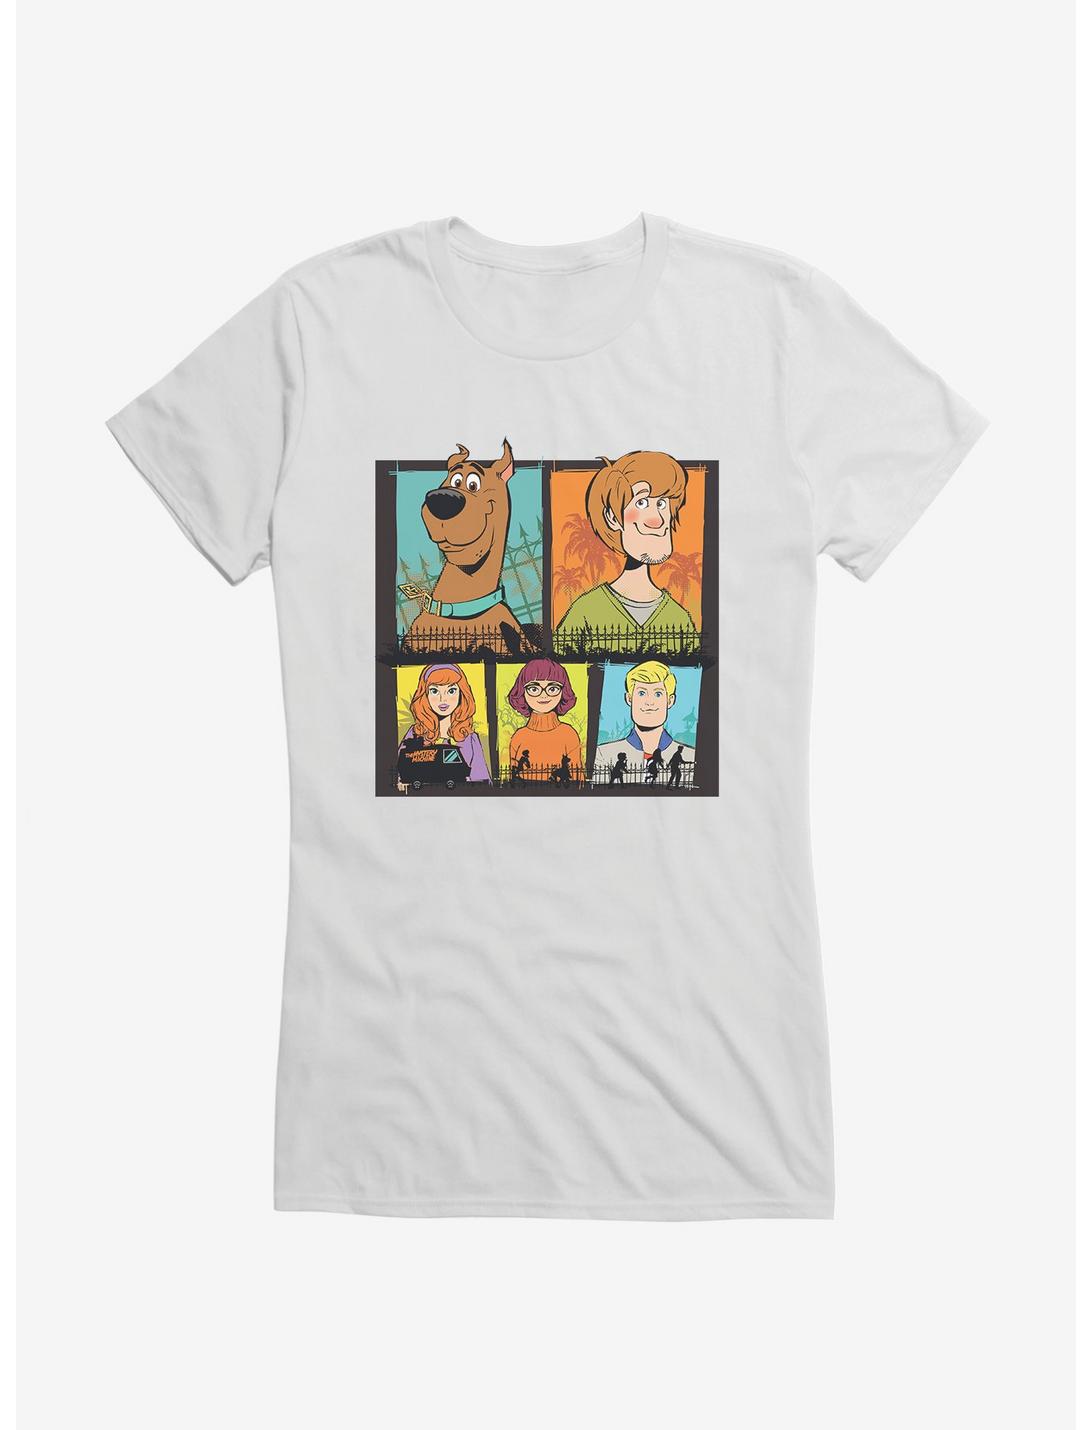 Scoob! Scooby, Shaggy, Velma, Fred And Daphne Girls T-Shirt, , hi-res